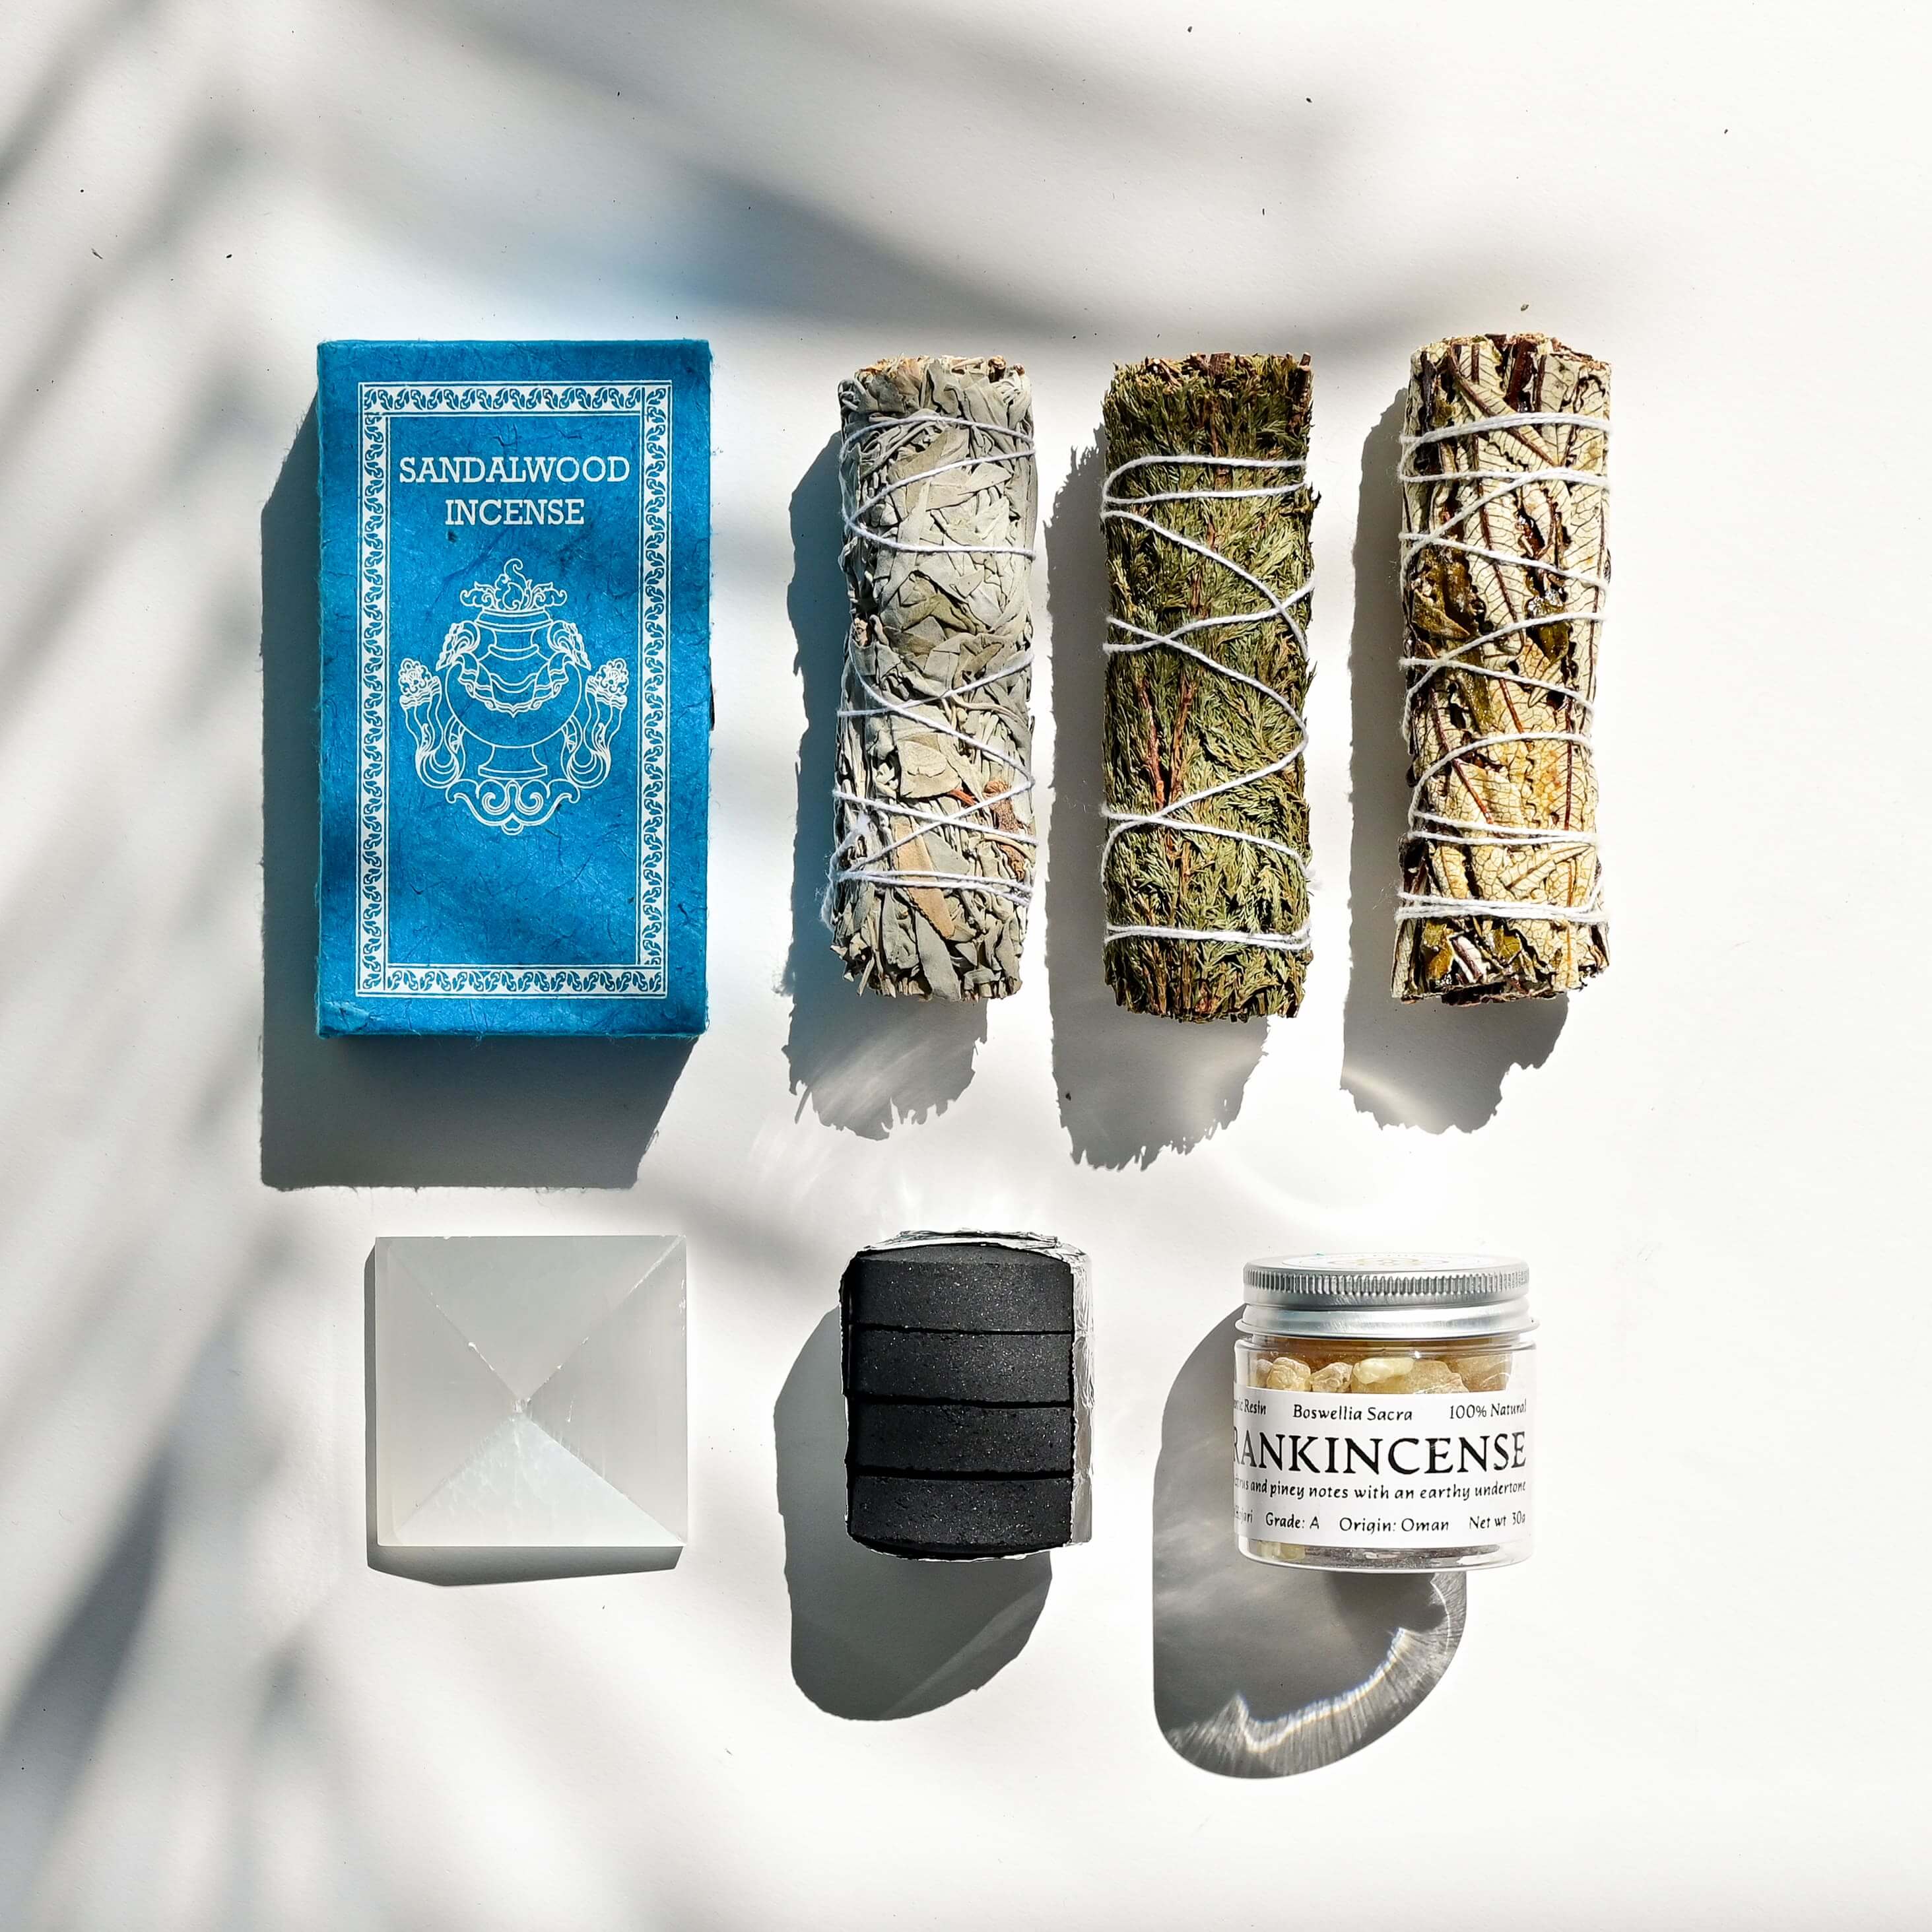 Contents of Home Blessing Kit on white surface